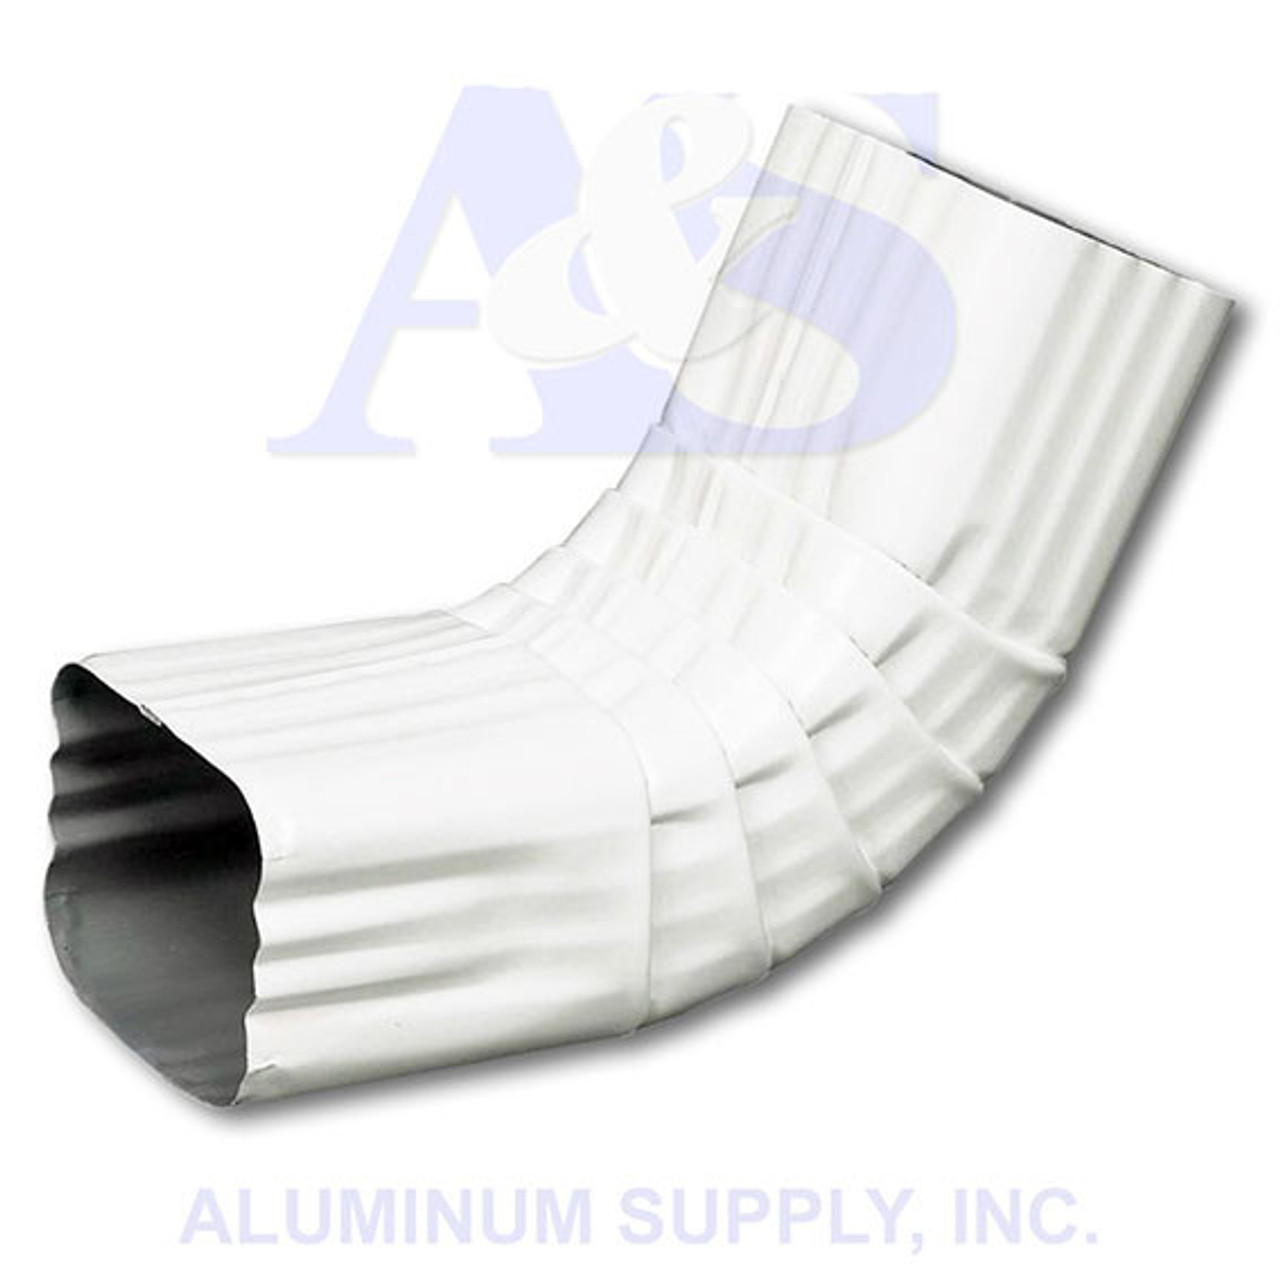 Aluminum Downspout Elbow  High Gloss white